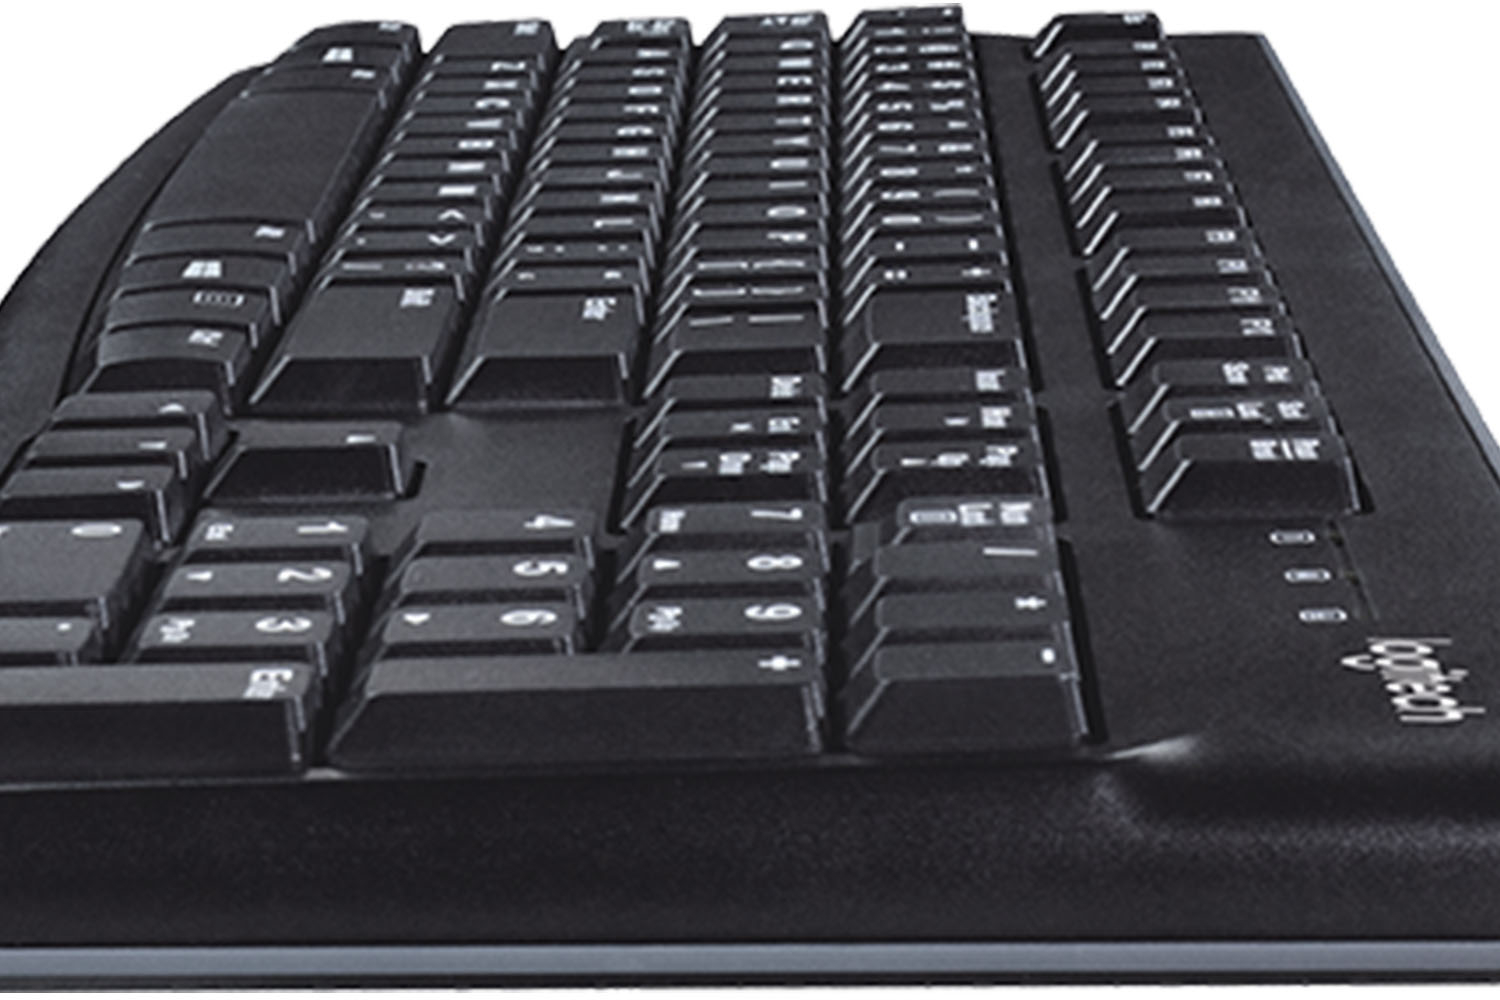 Logitech K120 Full-size Wired Membrane Keyboard for PC with Spill-Resistant Design 920-002478 - Best Buy